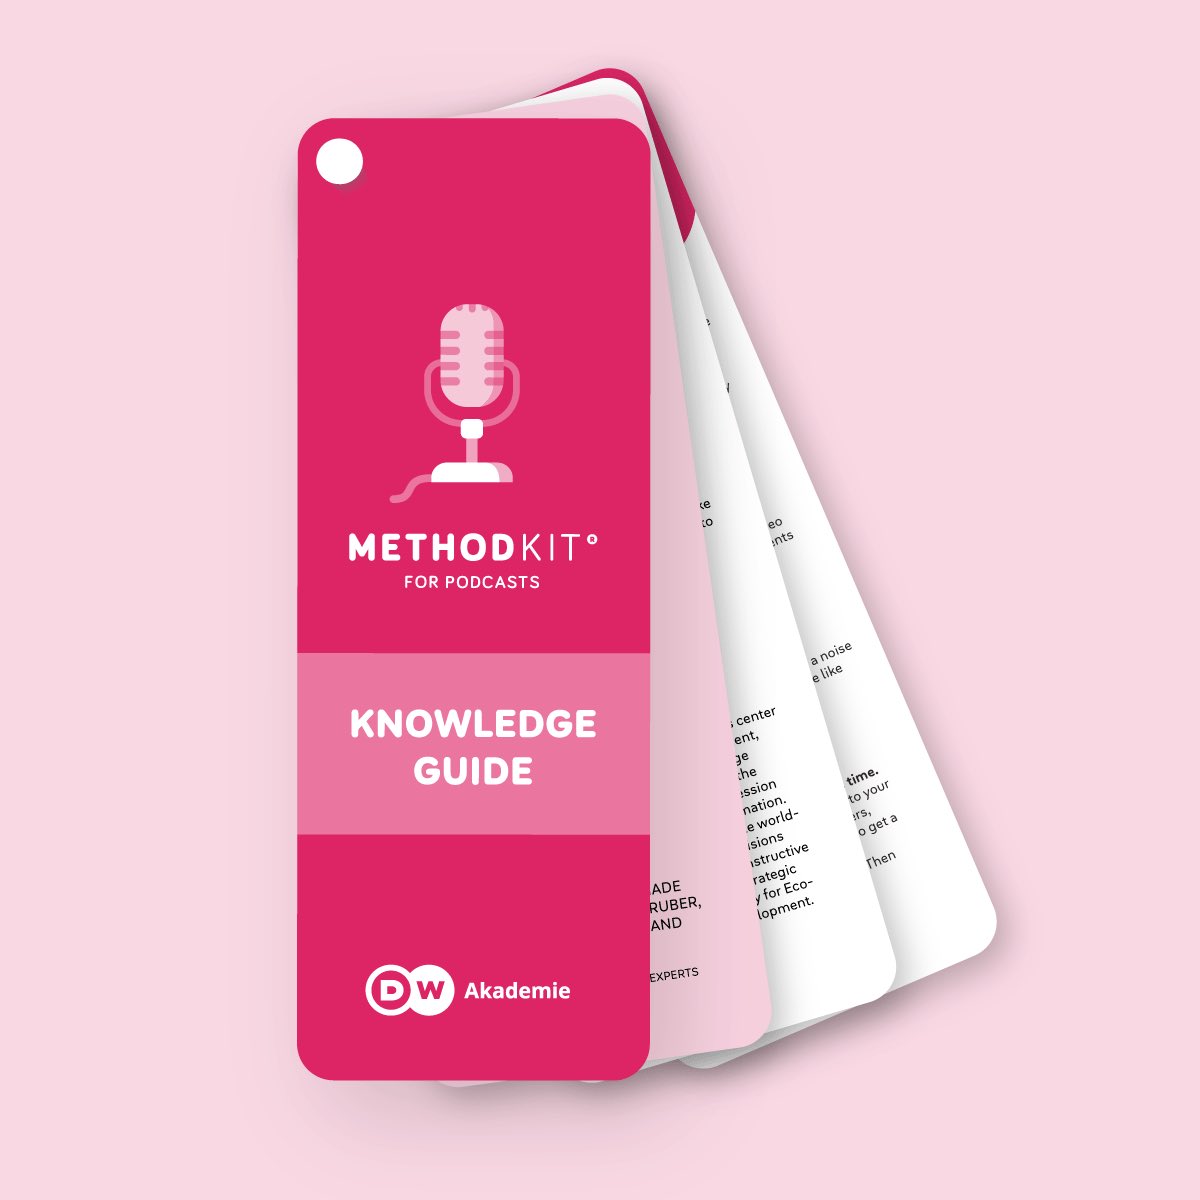 The new Podcast Knowledge Guide by @dw_akademie & @methodkit is just out! Thanks for all the amazing feedback we received at @RadiodaysEurope. Use RDE23 for free shipping. methodkit.com/podcast-knowle… #RDE23